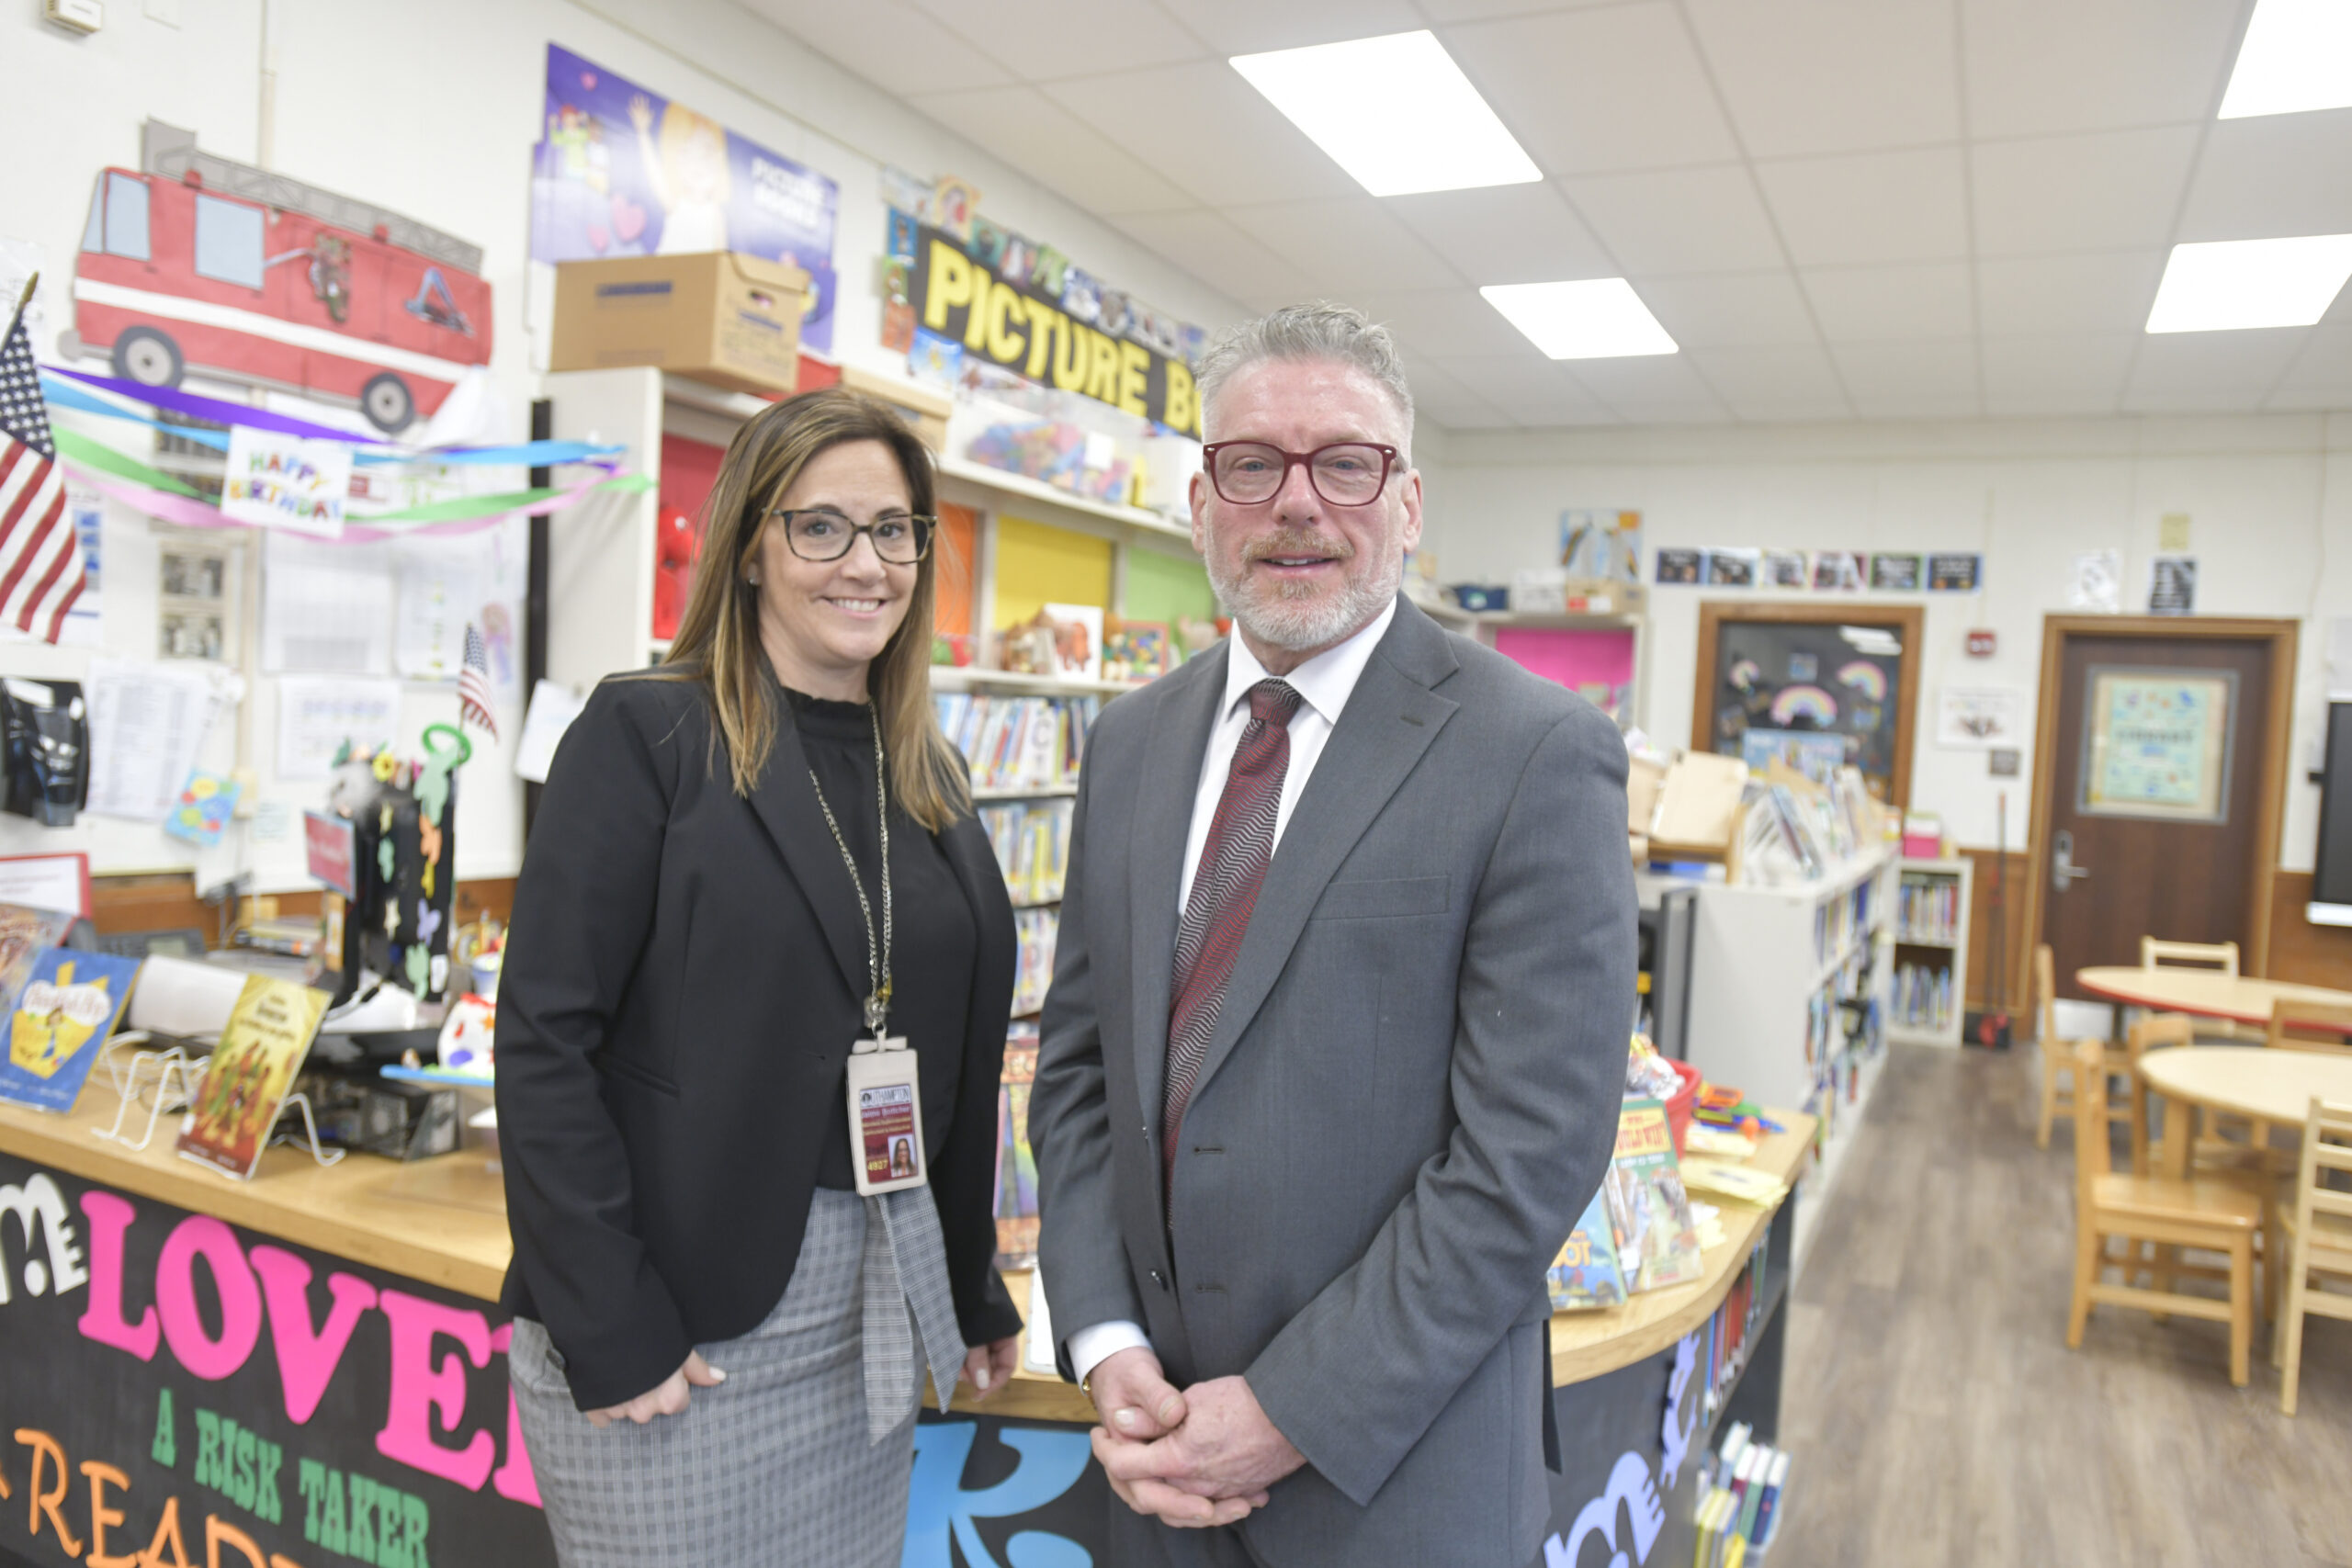 Jaime Bottcher, Ed.D. Assistant Superintendent of Curriculum and Instruction at Southampton School District and Superintendent Nicholas Dyno at Southampton Elementary School.   DANA SHAW